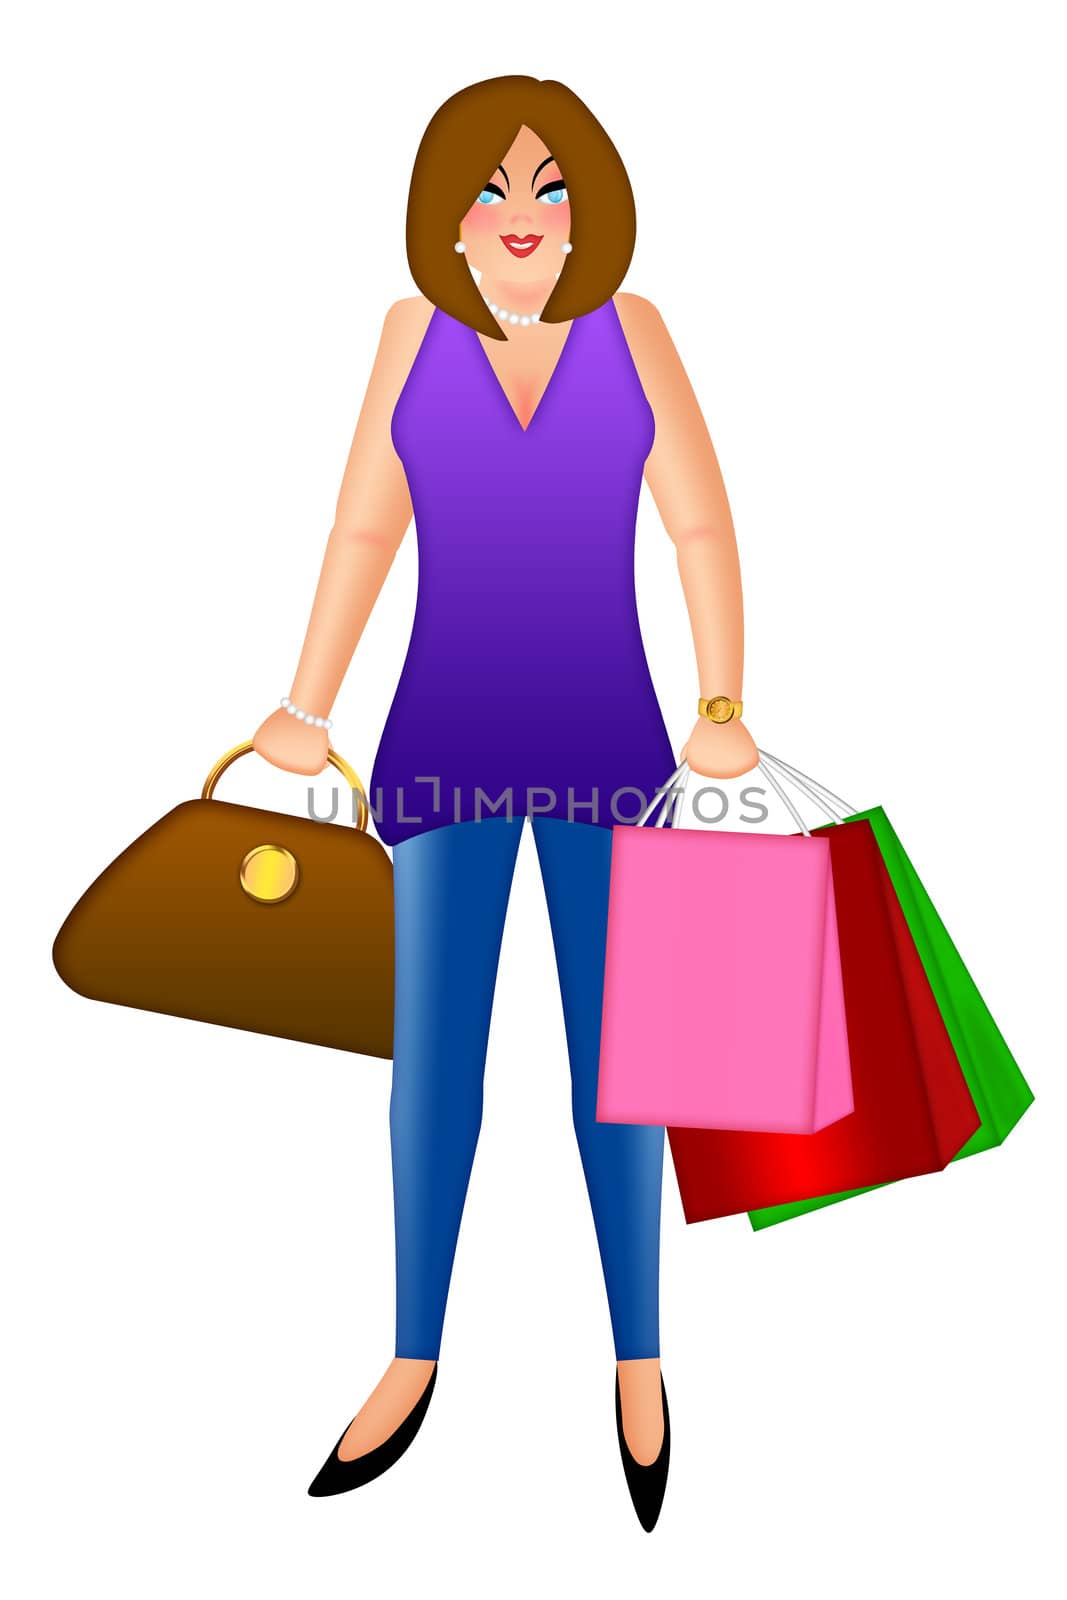 Woman with Shopping Bags and Handbag Purse Illustration by jpldesigns